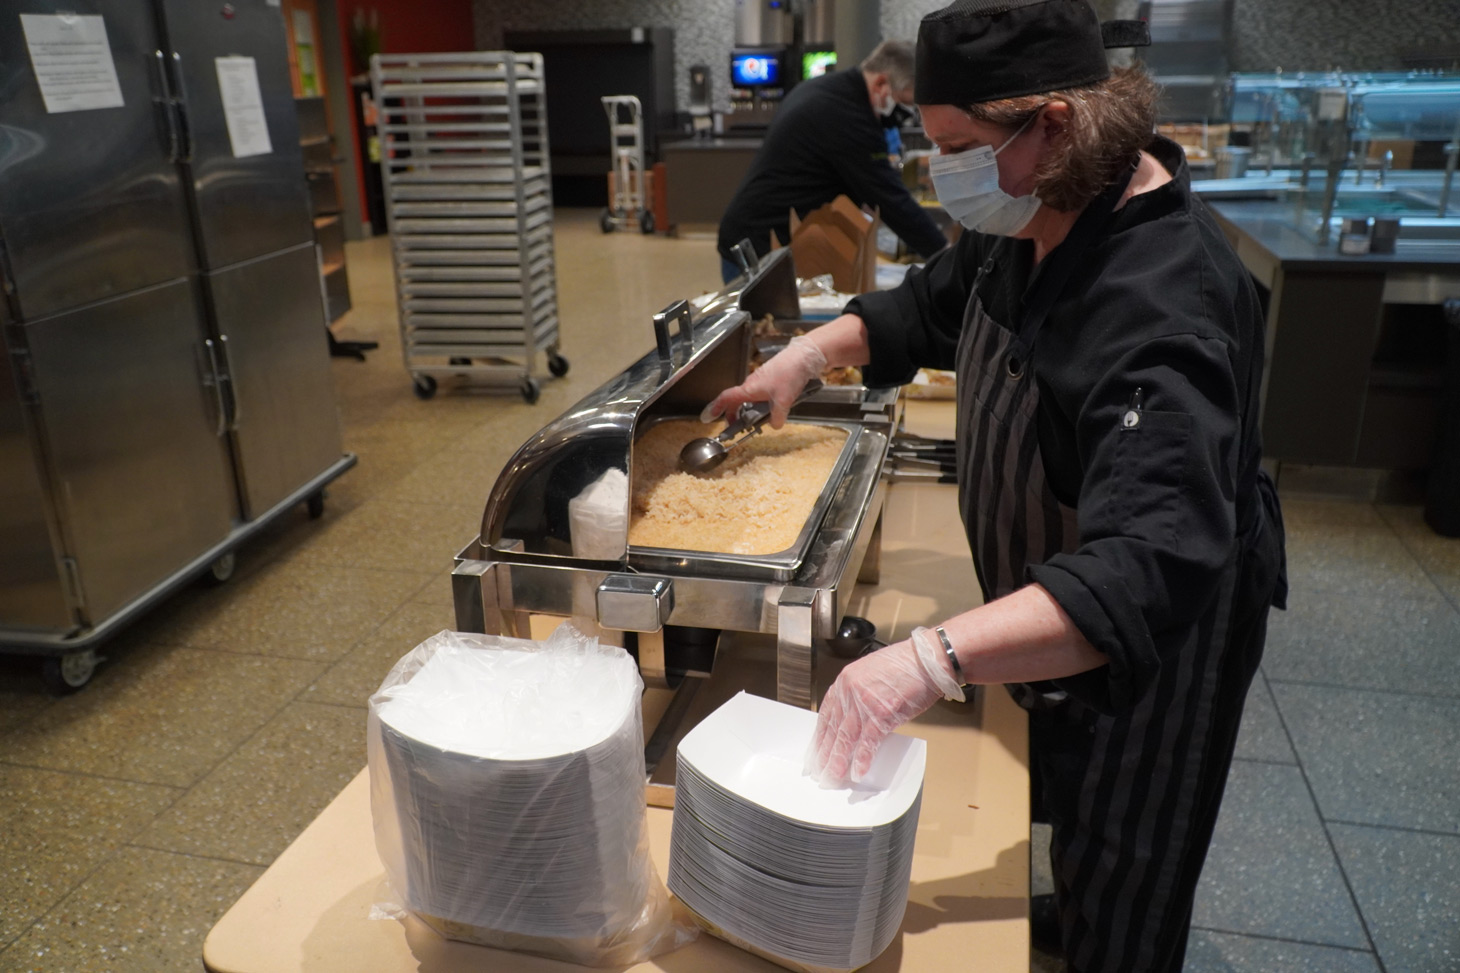 Tammy Sechler portions out rice for a jerk chicken bowl 